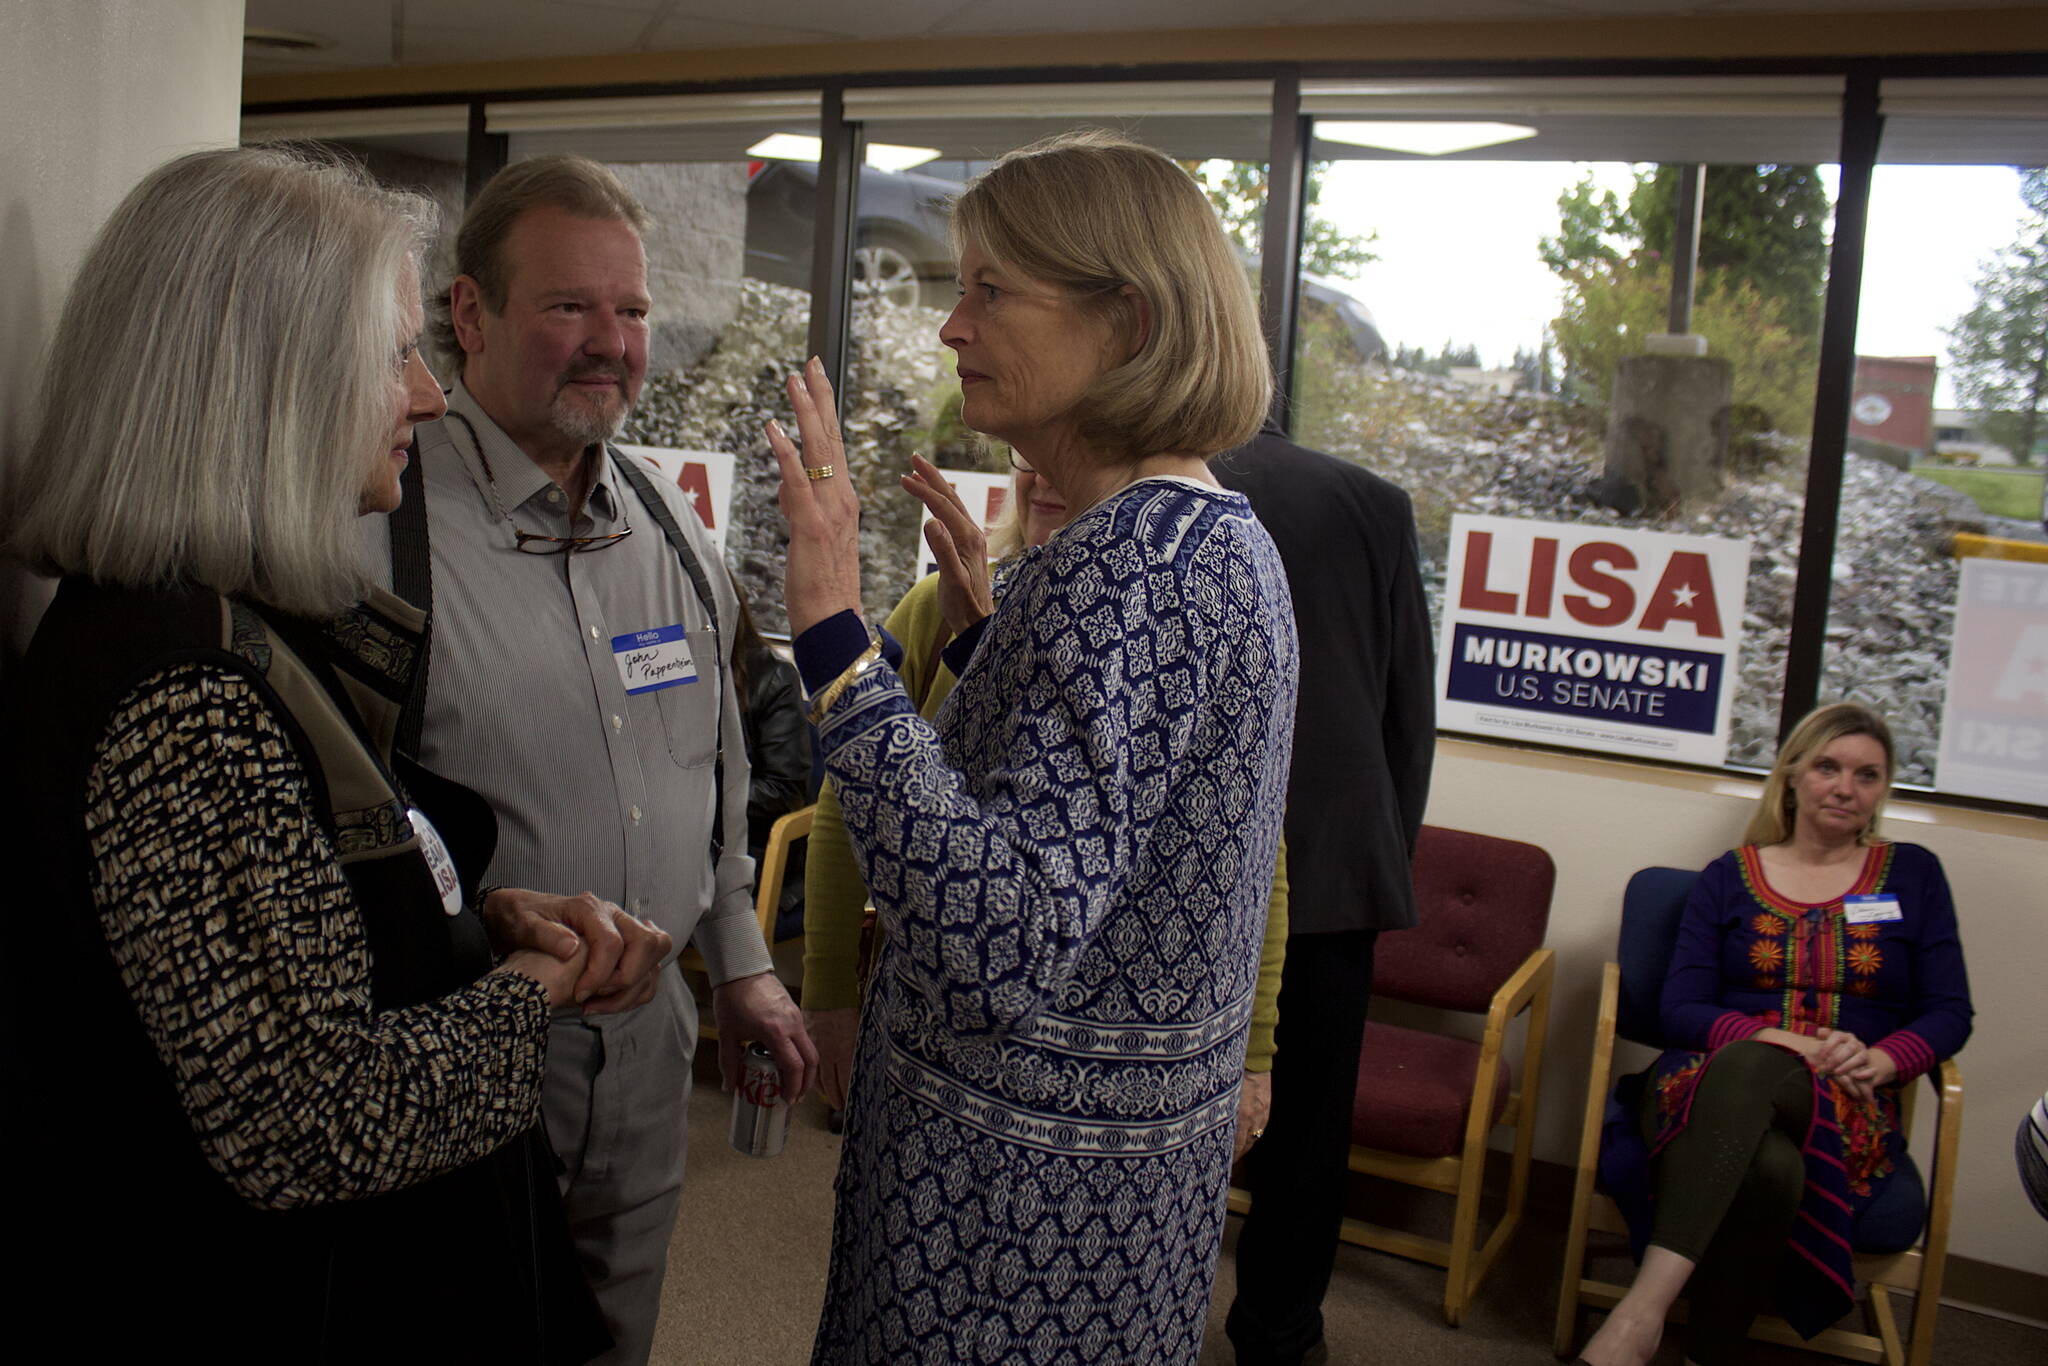 U.S. Sen. Lisa Murkowski discusses her reelection campaign with supporters during the official opening of her Juneau campaign headquarters Thursday evening at Kootznoowoo Plaza. (Mark Sabbatini / Juneau Empire File)